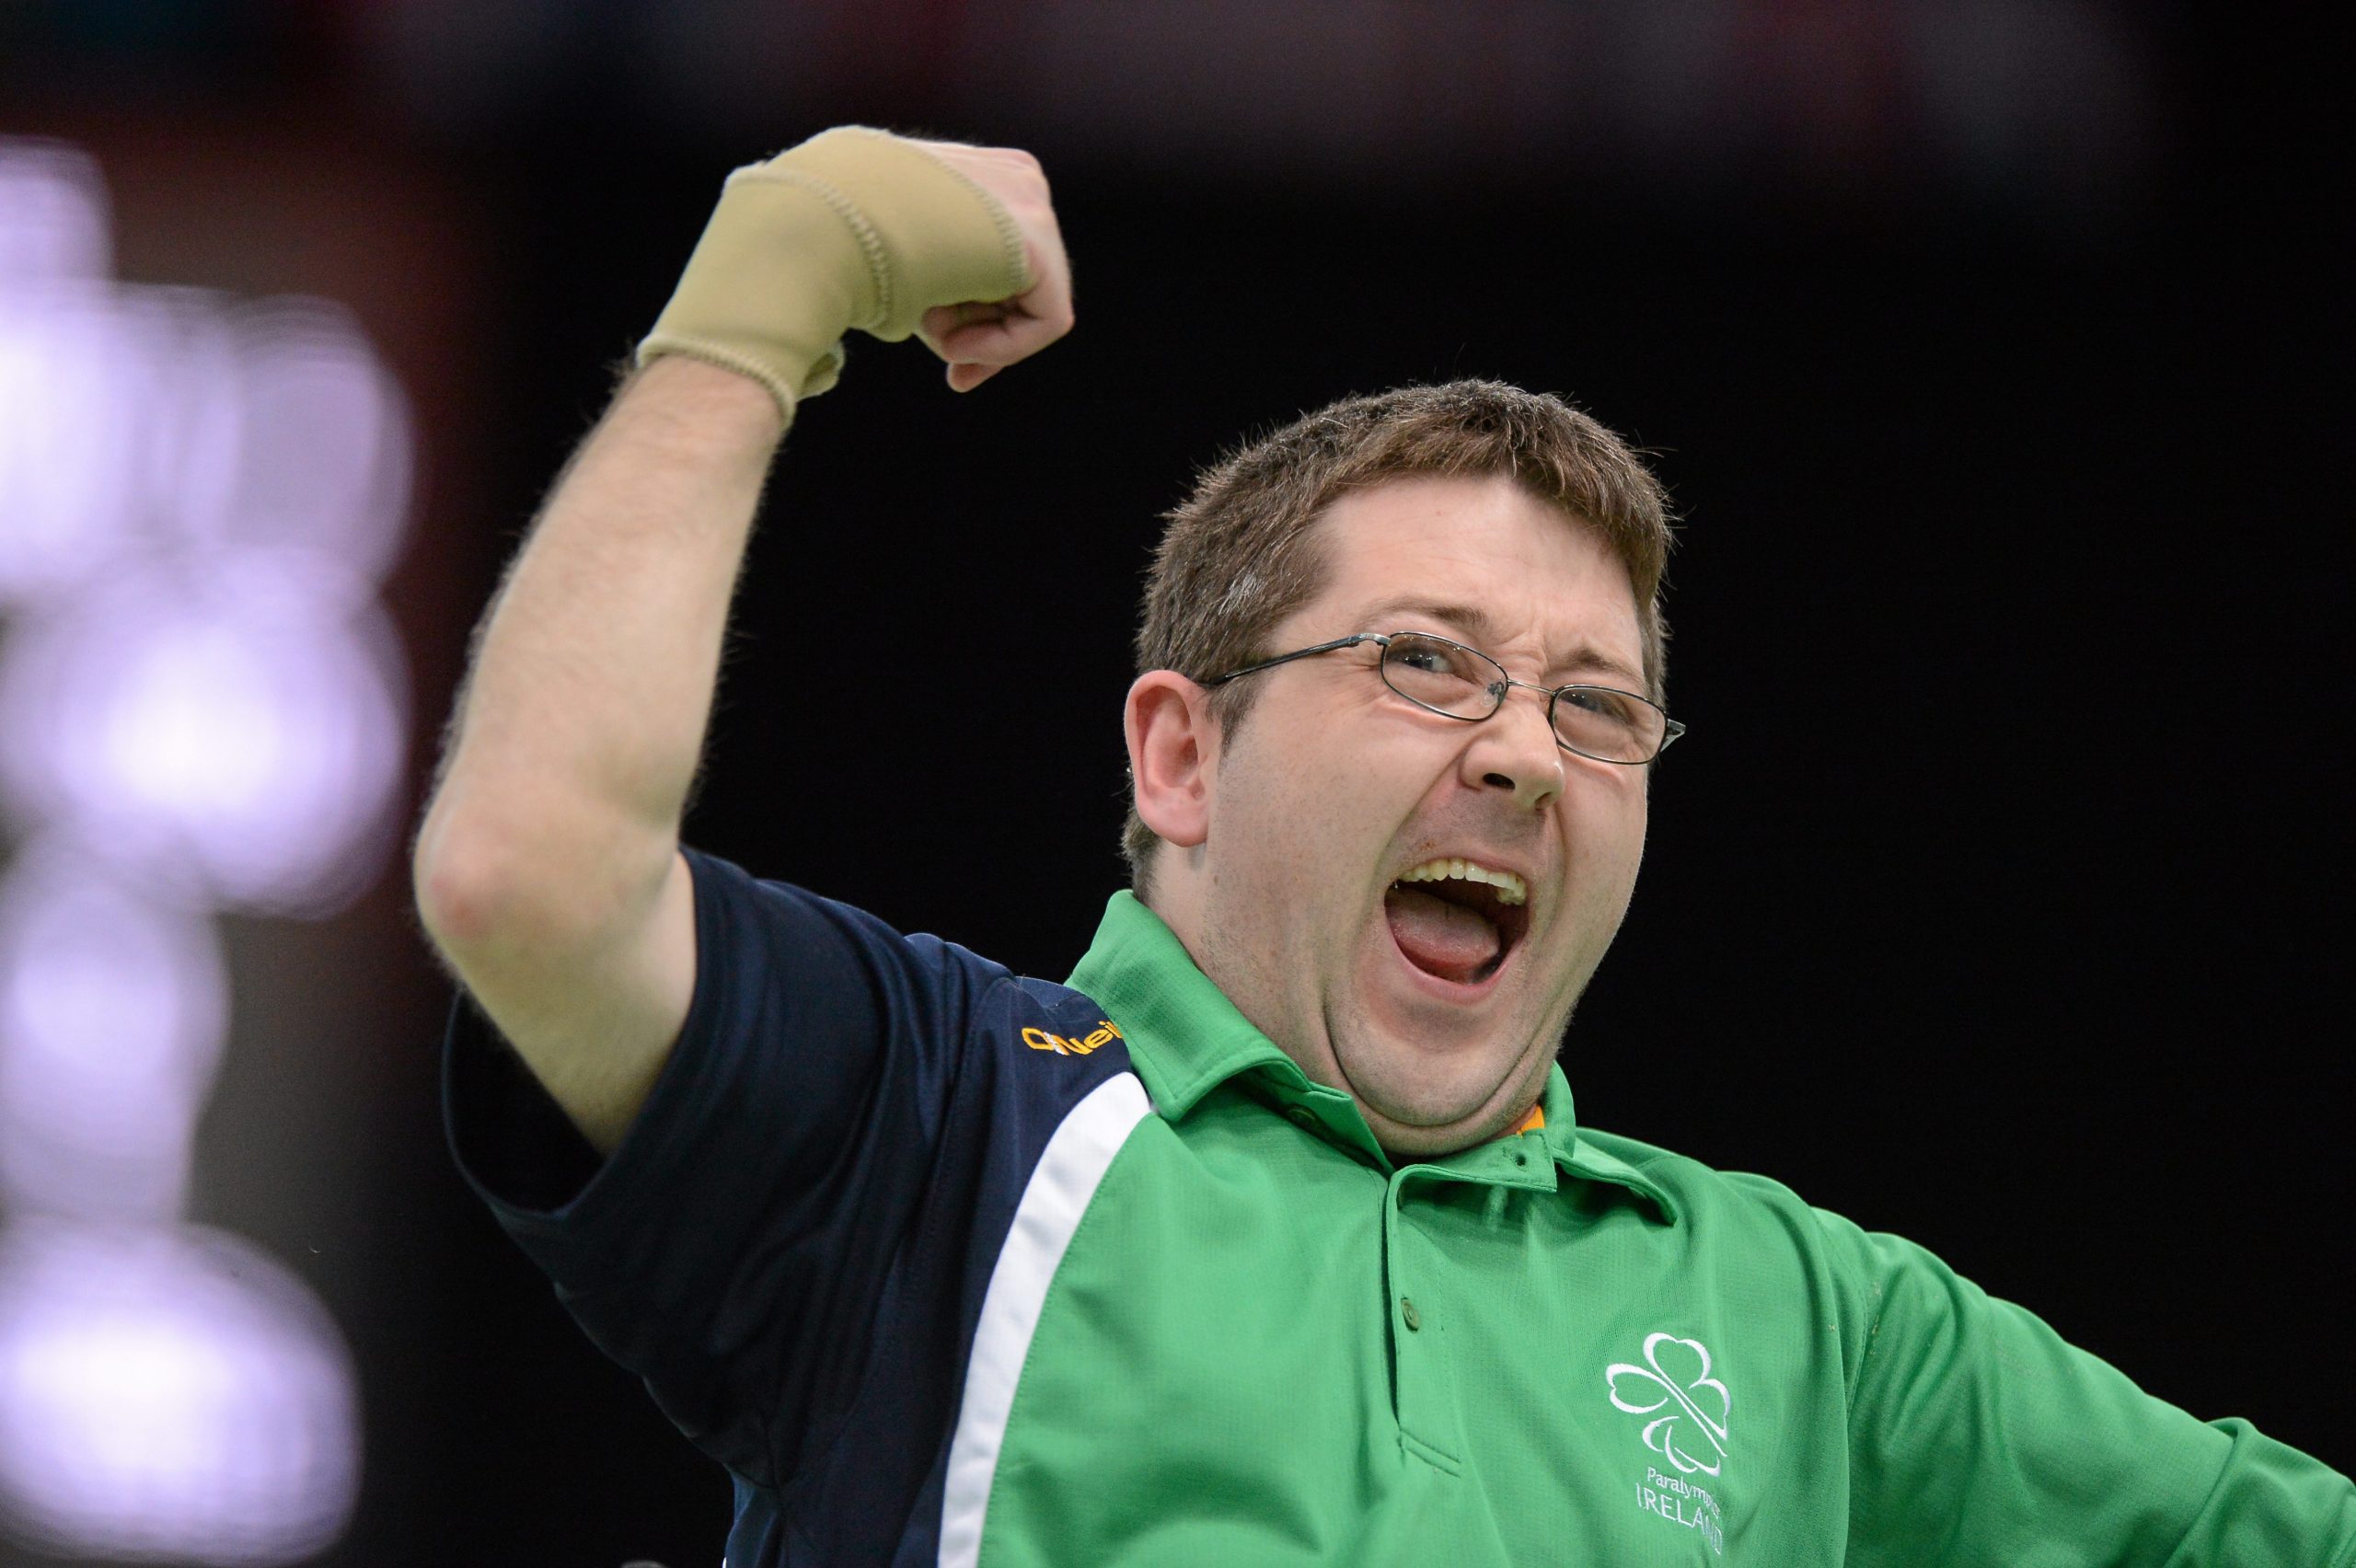 2 September 2012; Ireland's Padraic Moran, from Bray, Co. Wicklow, reacts during the boccia mixed team BC1-2 against Brazil. Ireland lost the match 11-2. London 2012 Paralympic Games, Boccia, ExCeL Arena, Royal Victoria Dock, London, England. Picture credit: Brian Lawless / SPORTSFILE *** NO REPRODUCTION FEE ***